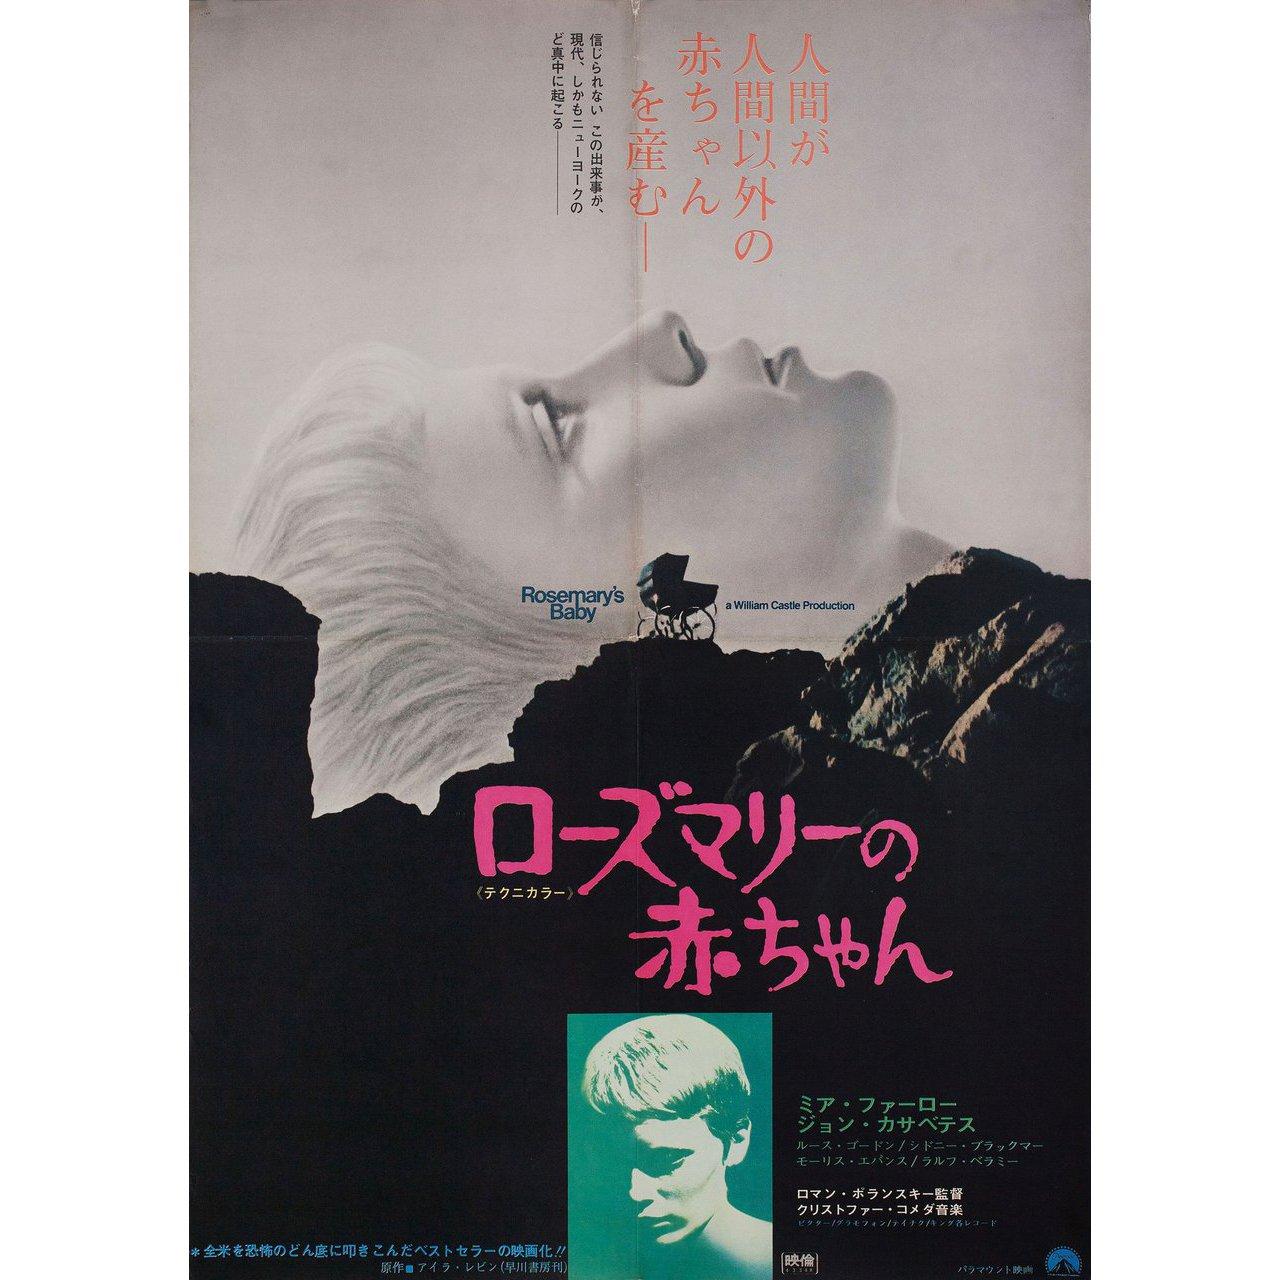 Original 1968 Japanese B2 poster for the film “Rosemary's Baby” directed by Roman Polanski with Mia Farrow / John Cassavetes / Ruth Gordon / Sidney Blackmer. Very good-fine condition, folded. Many original posters were issued folded or were